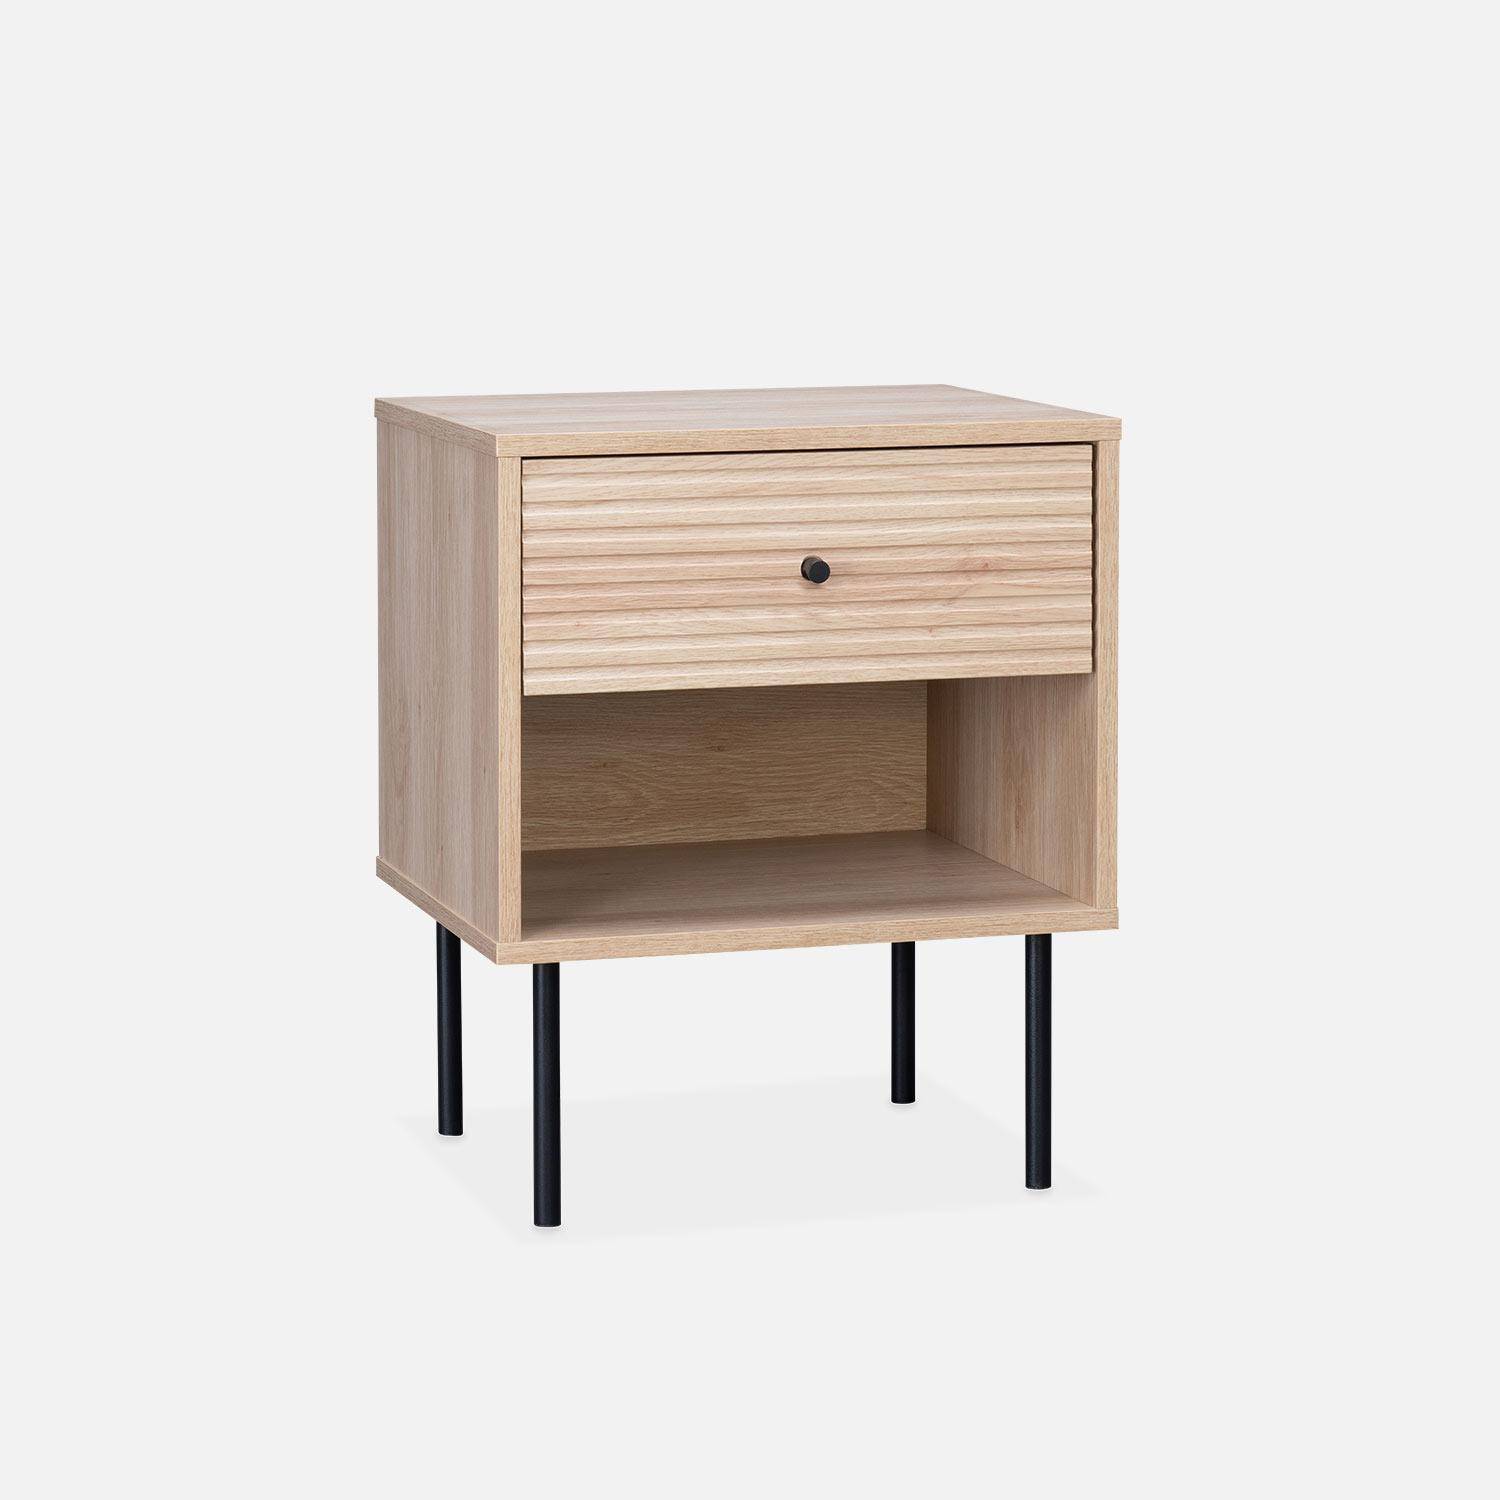 Grooved wood-effect bedside table, 45x39.5x55cm - Braga - Natural wood colour,sweeek,Photo3